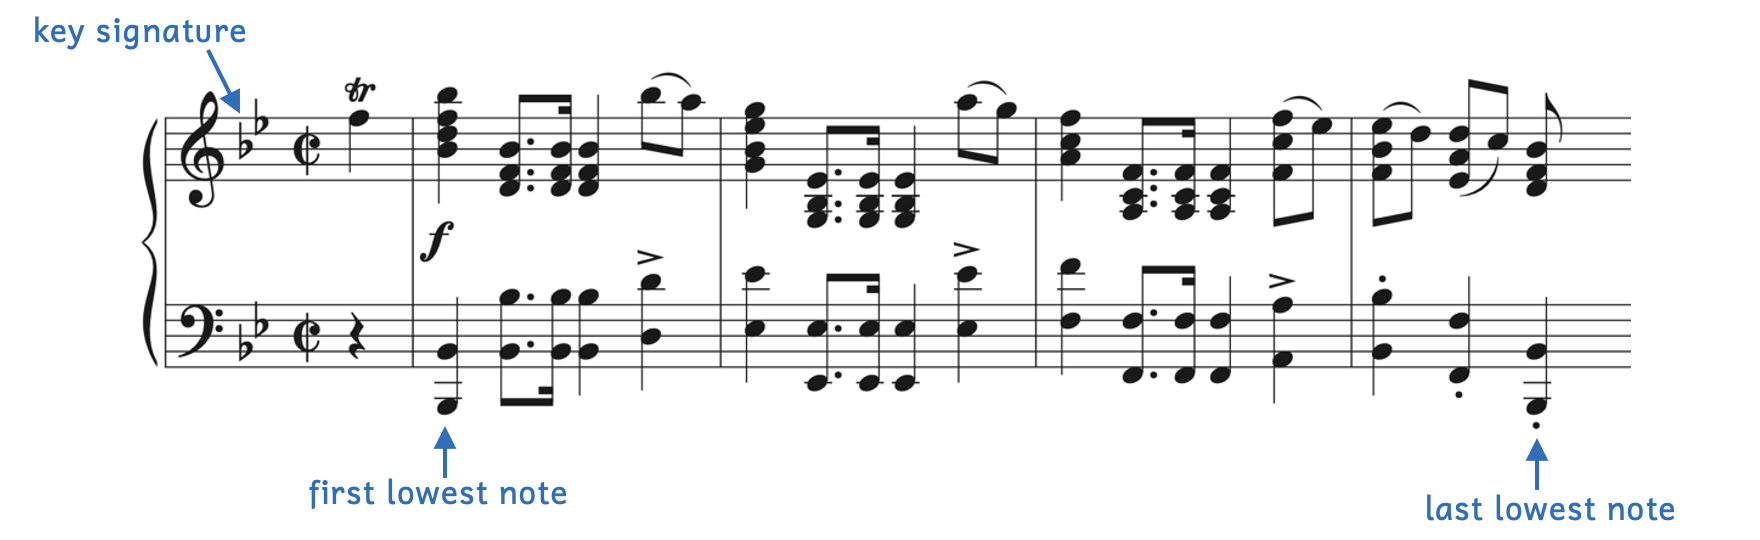 Finding the key in Szymanowska's March No. 5. The key signature has two flats. The first lowest note is B-flat. The last lowest note is B-flat.